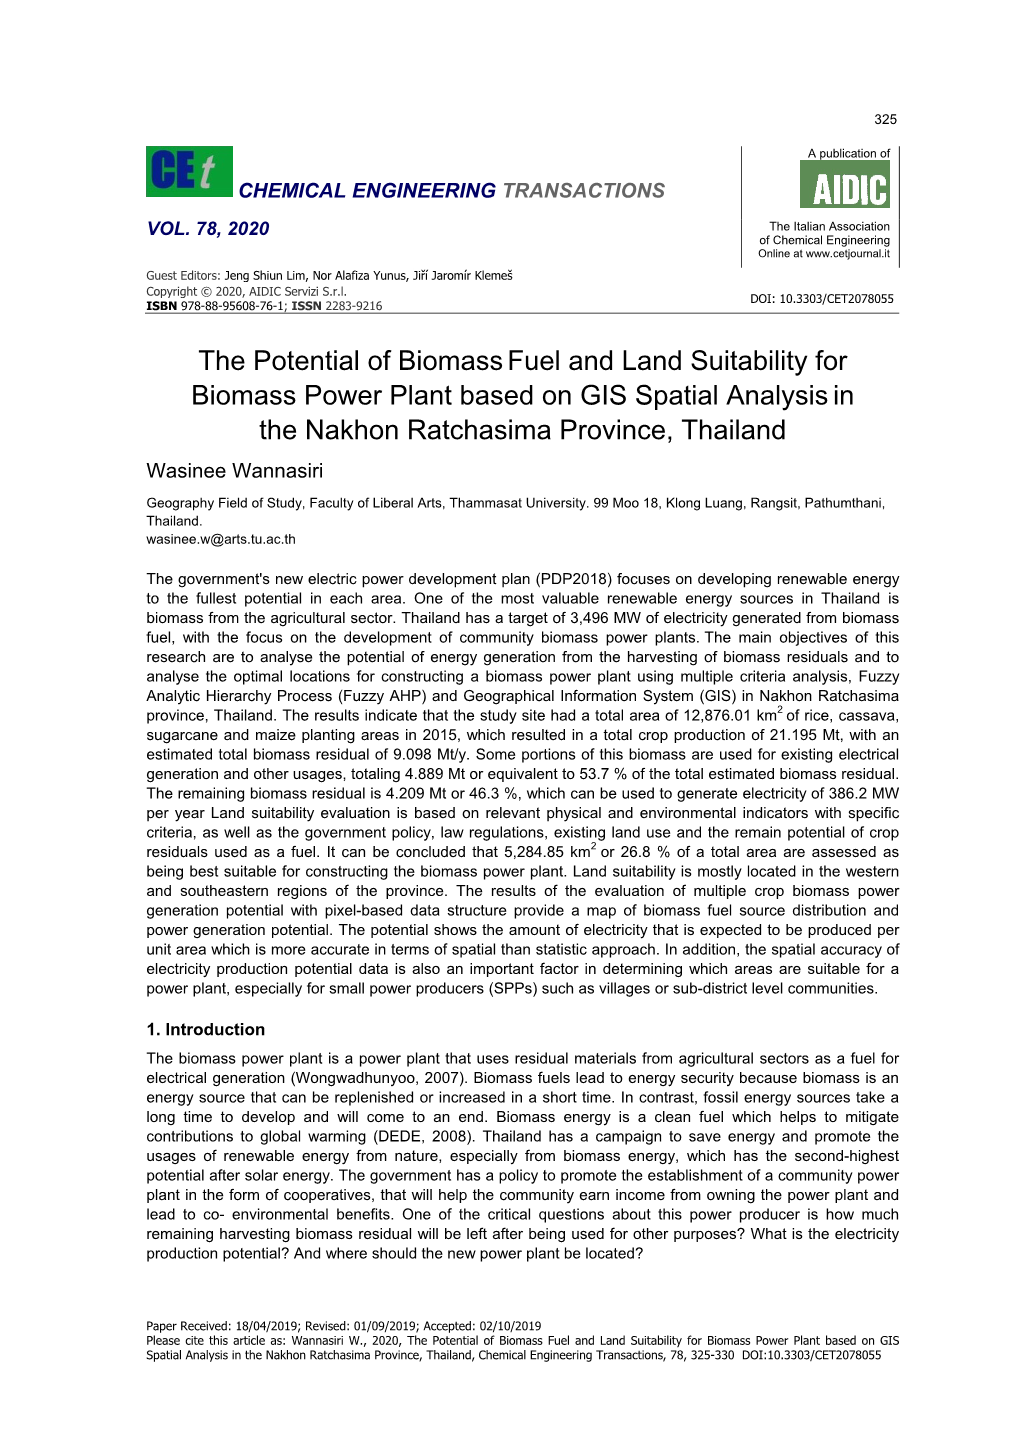 The Potential of Biomassfuel and Land Suitability for Biomass Power